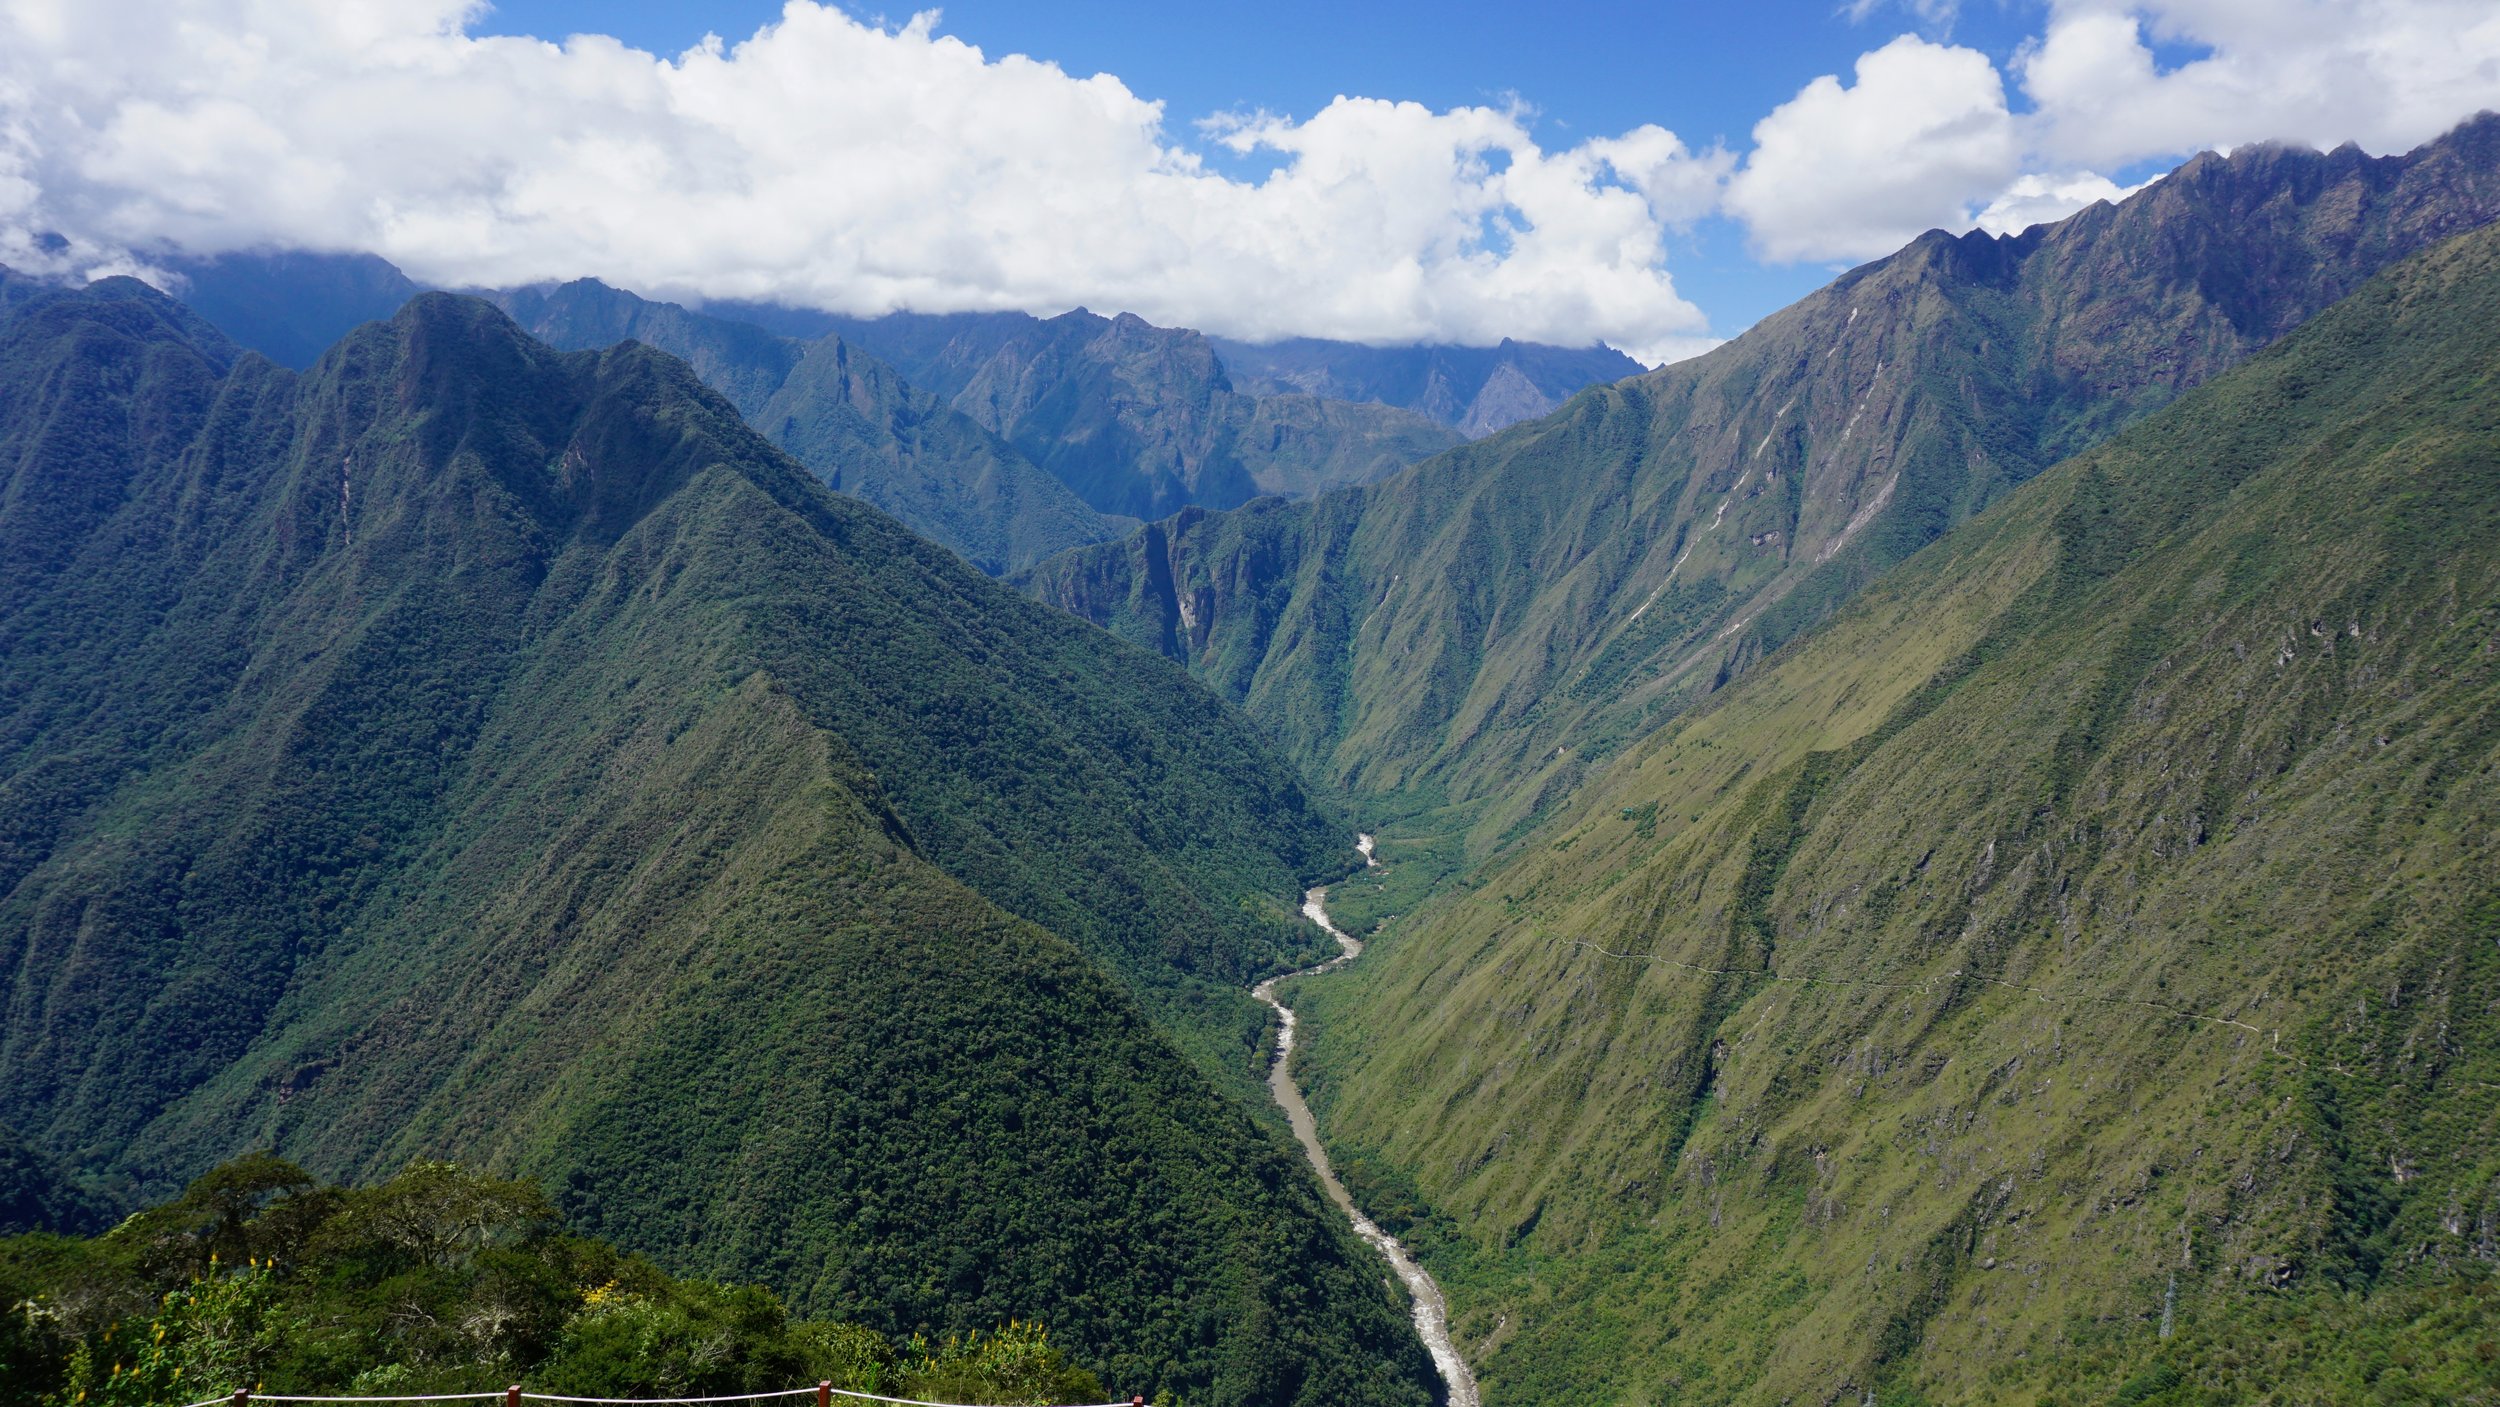 View of the Urubamba river valley from Wiñay Wayna